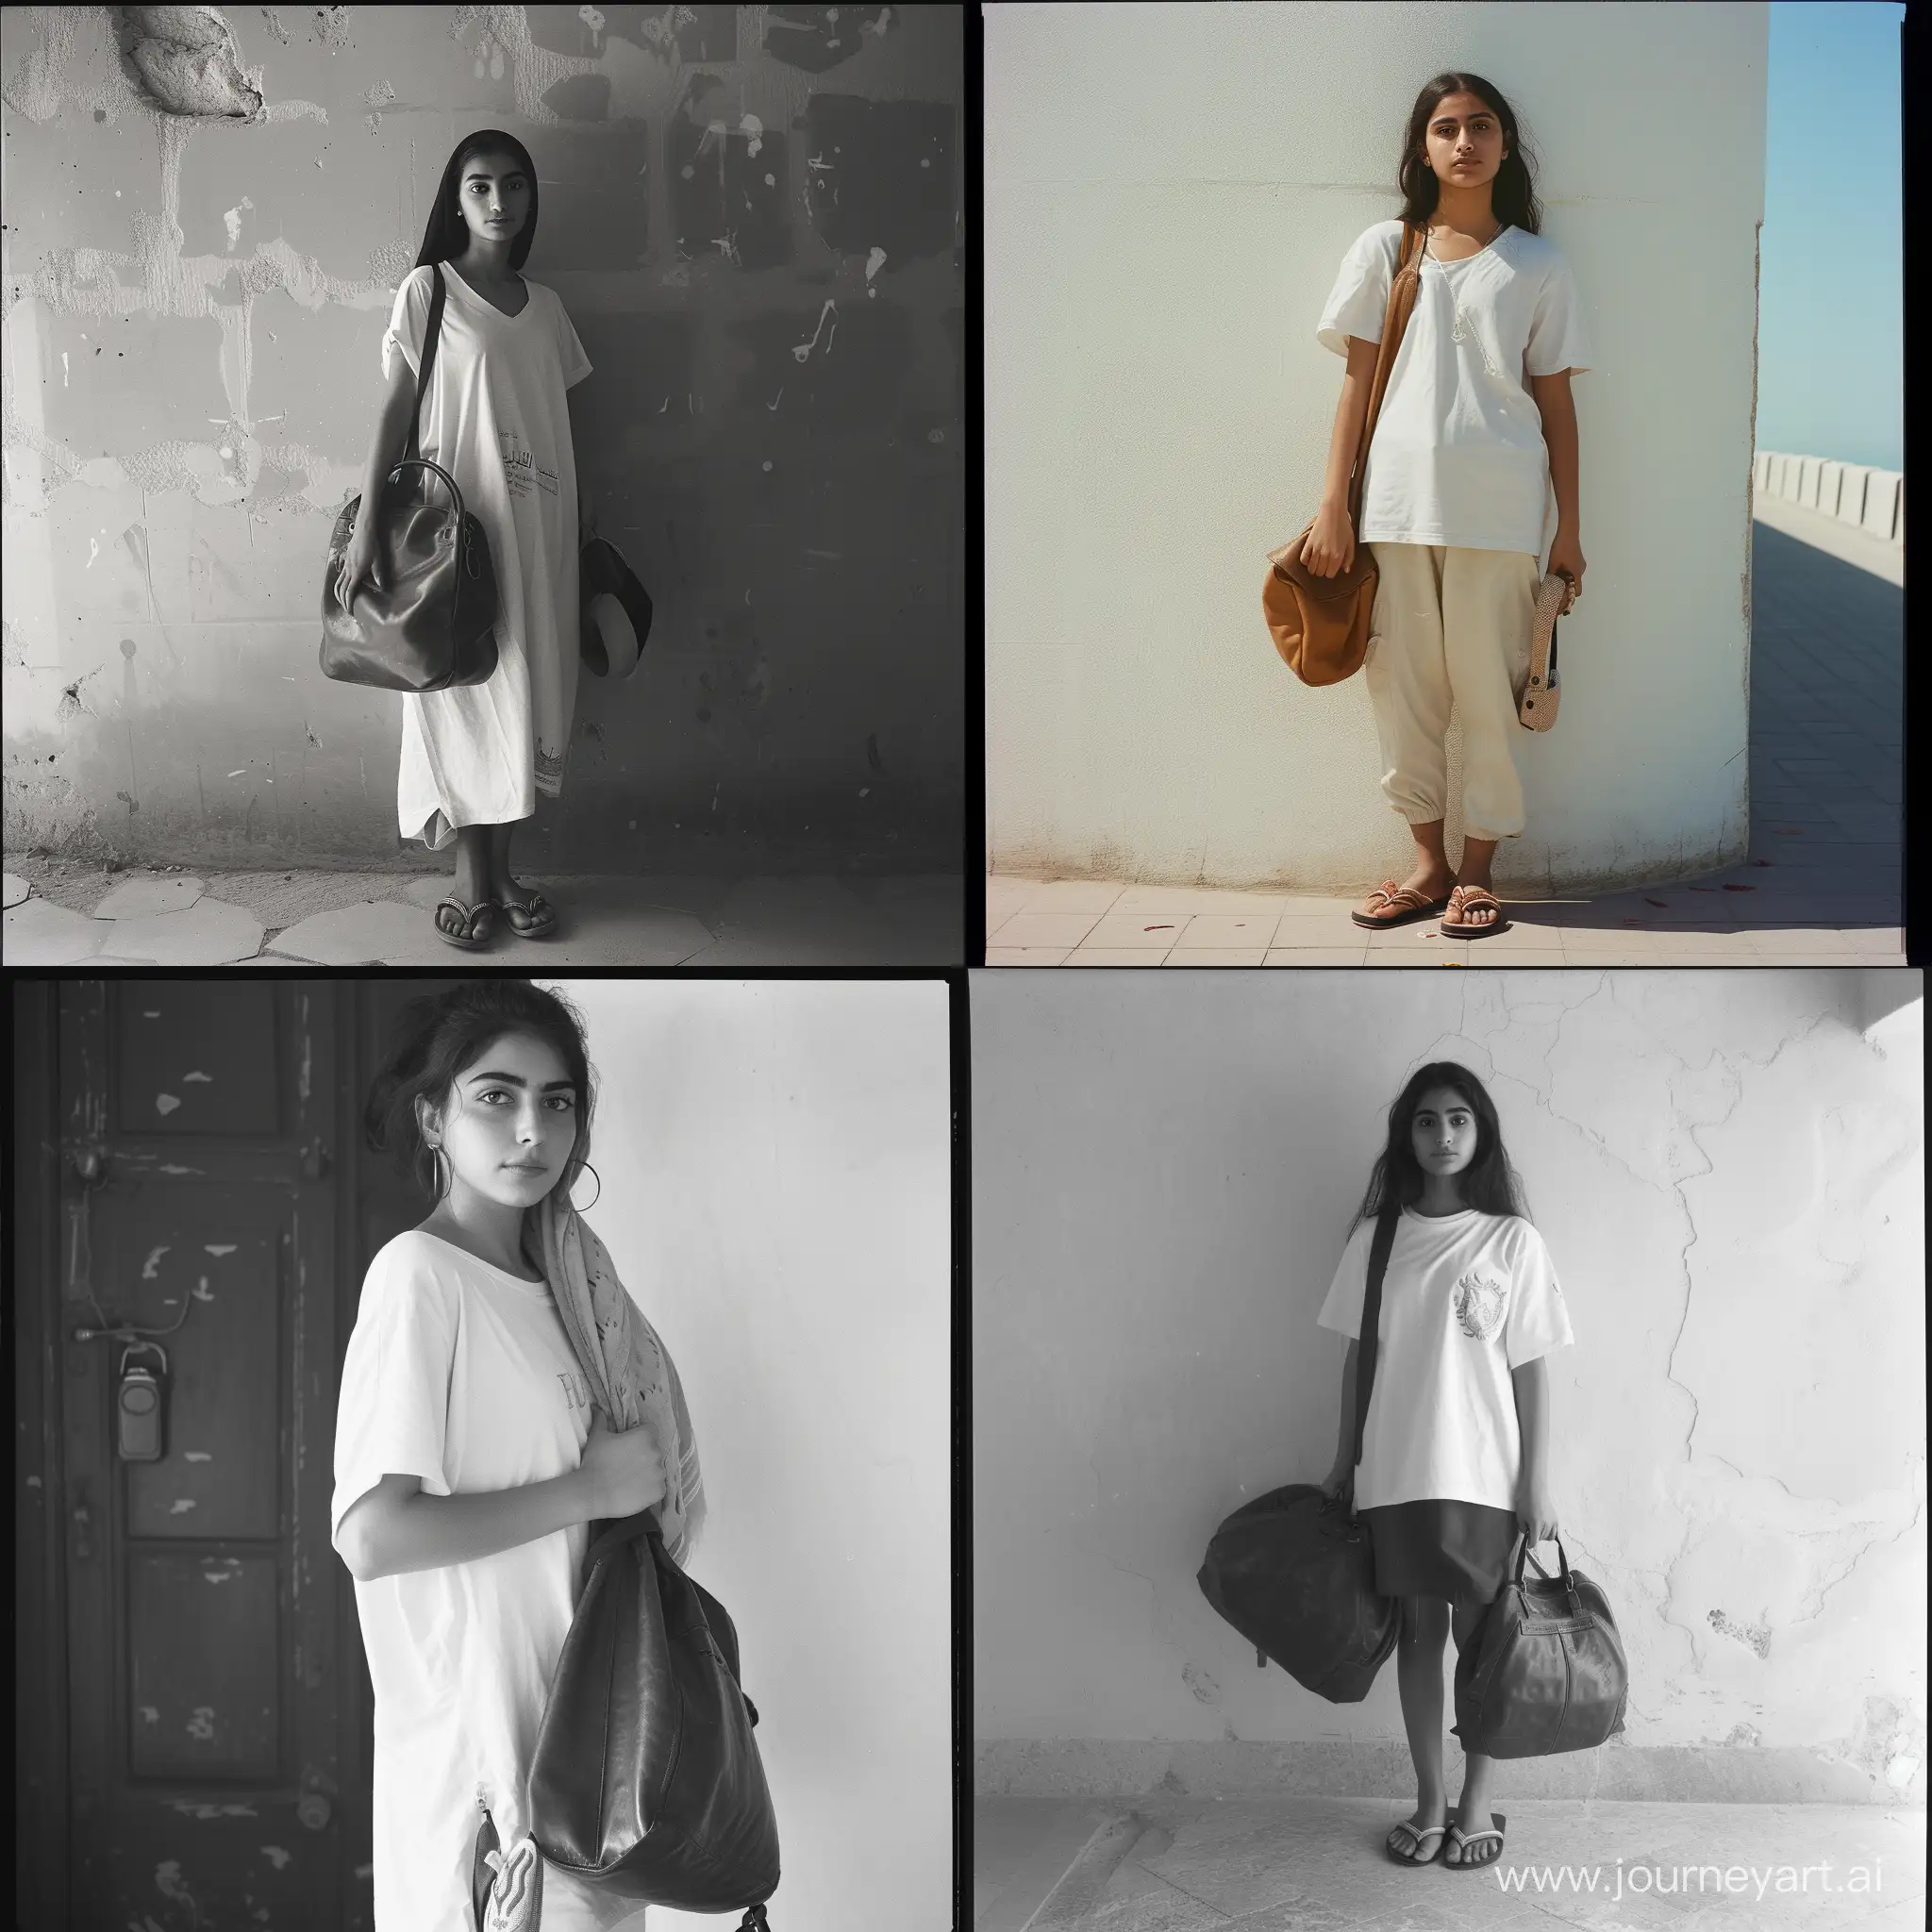 18 year old saudi female doing modeling. She is holding a leather bag and wearing a white t-shirt and flip flops shot with kodak gold 400